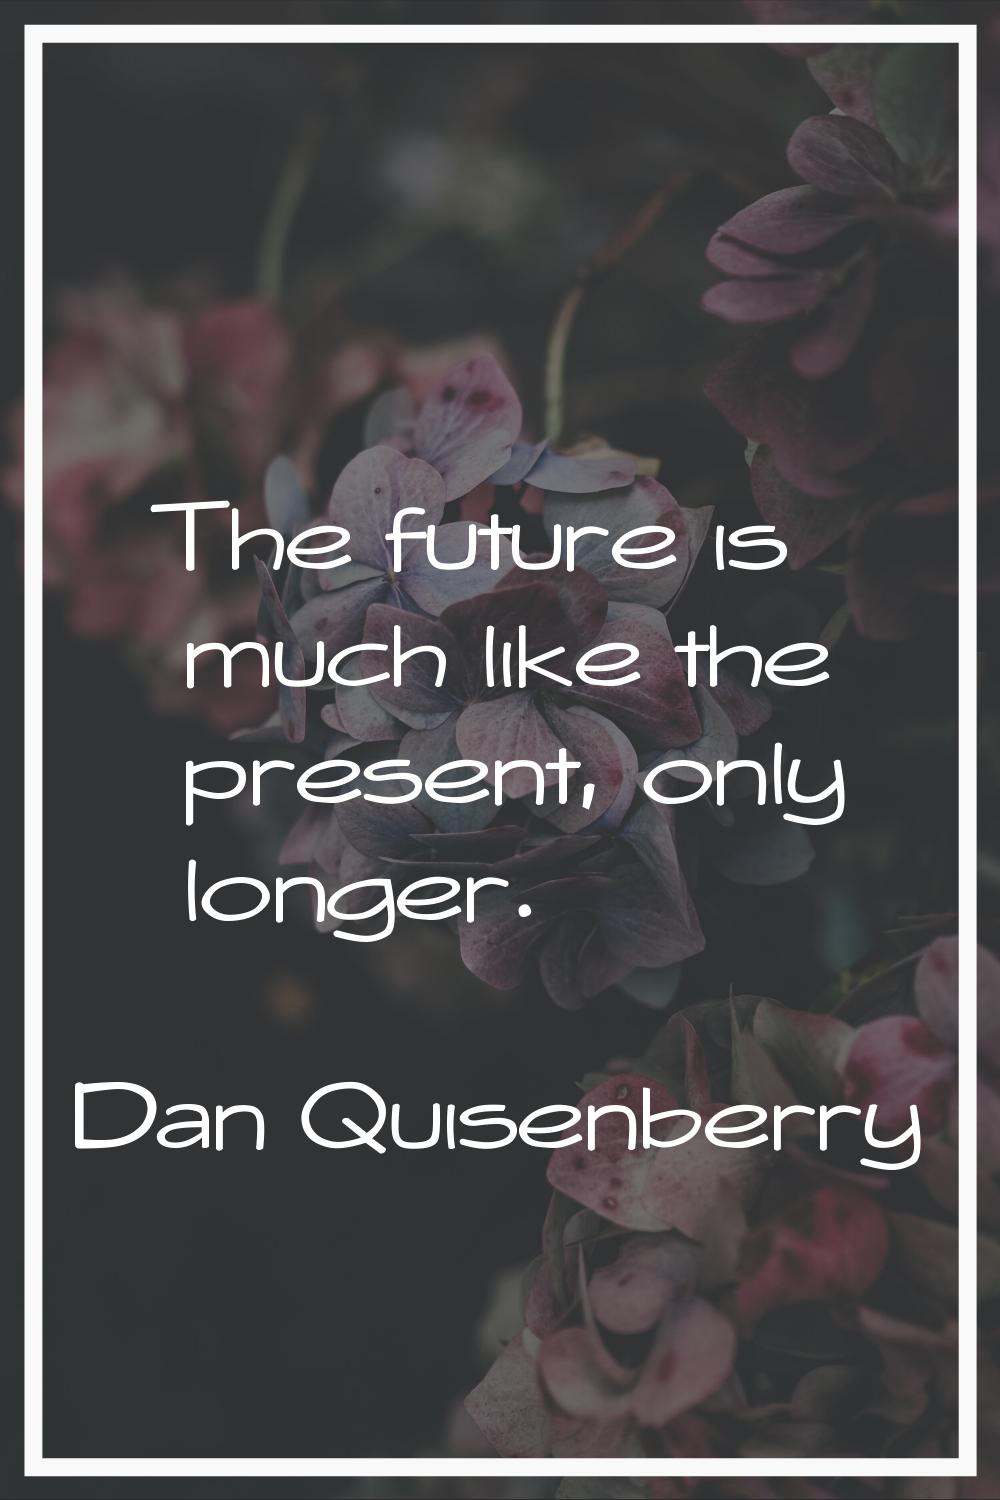 The future is much like the present, only longer.